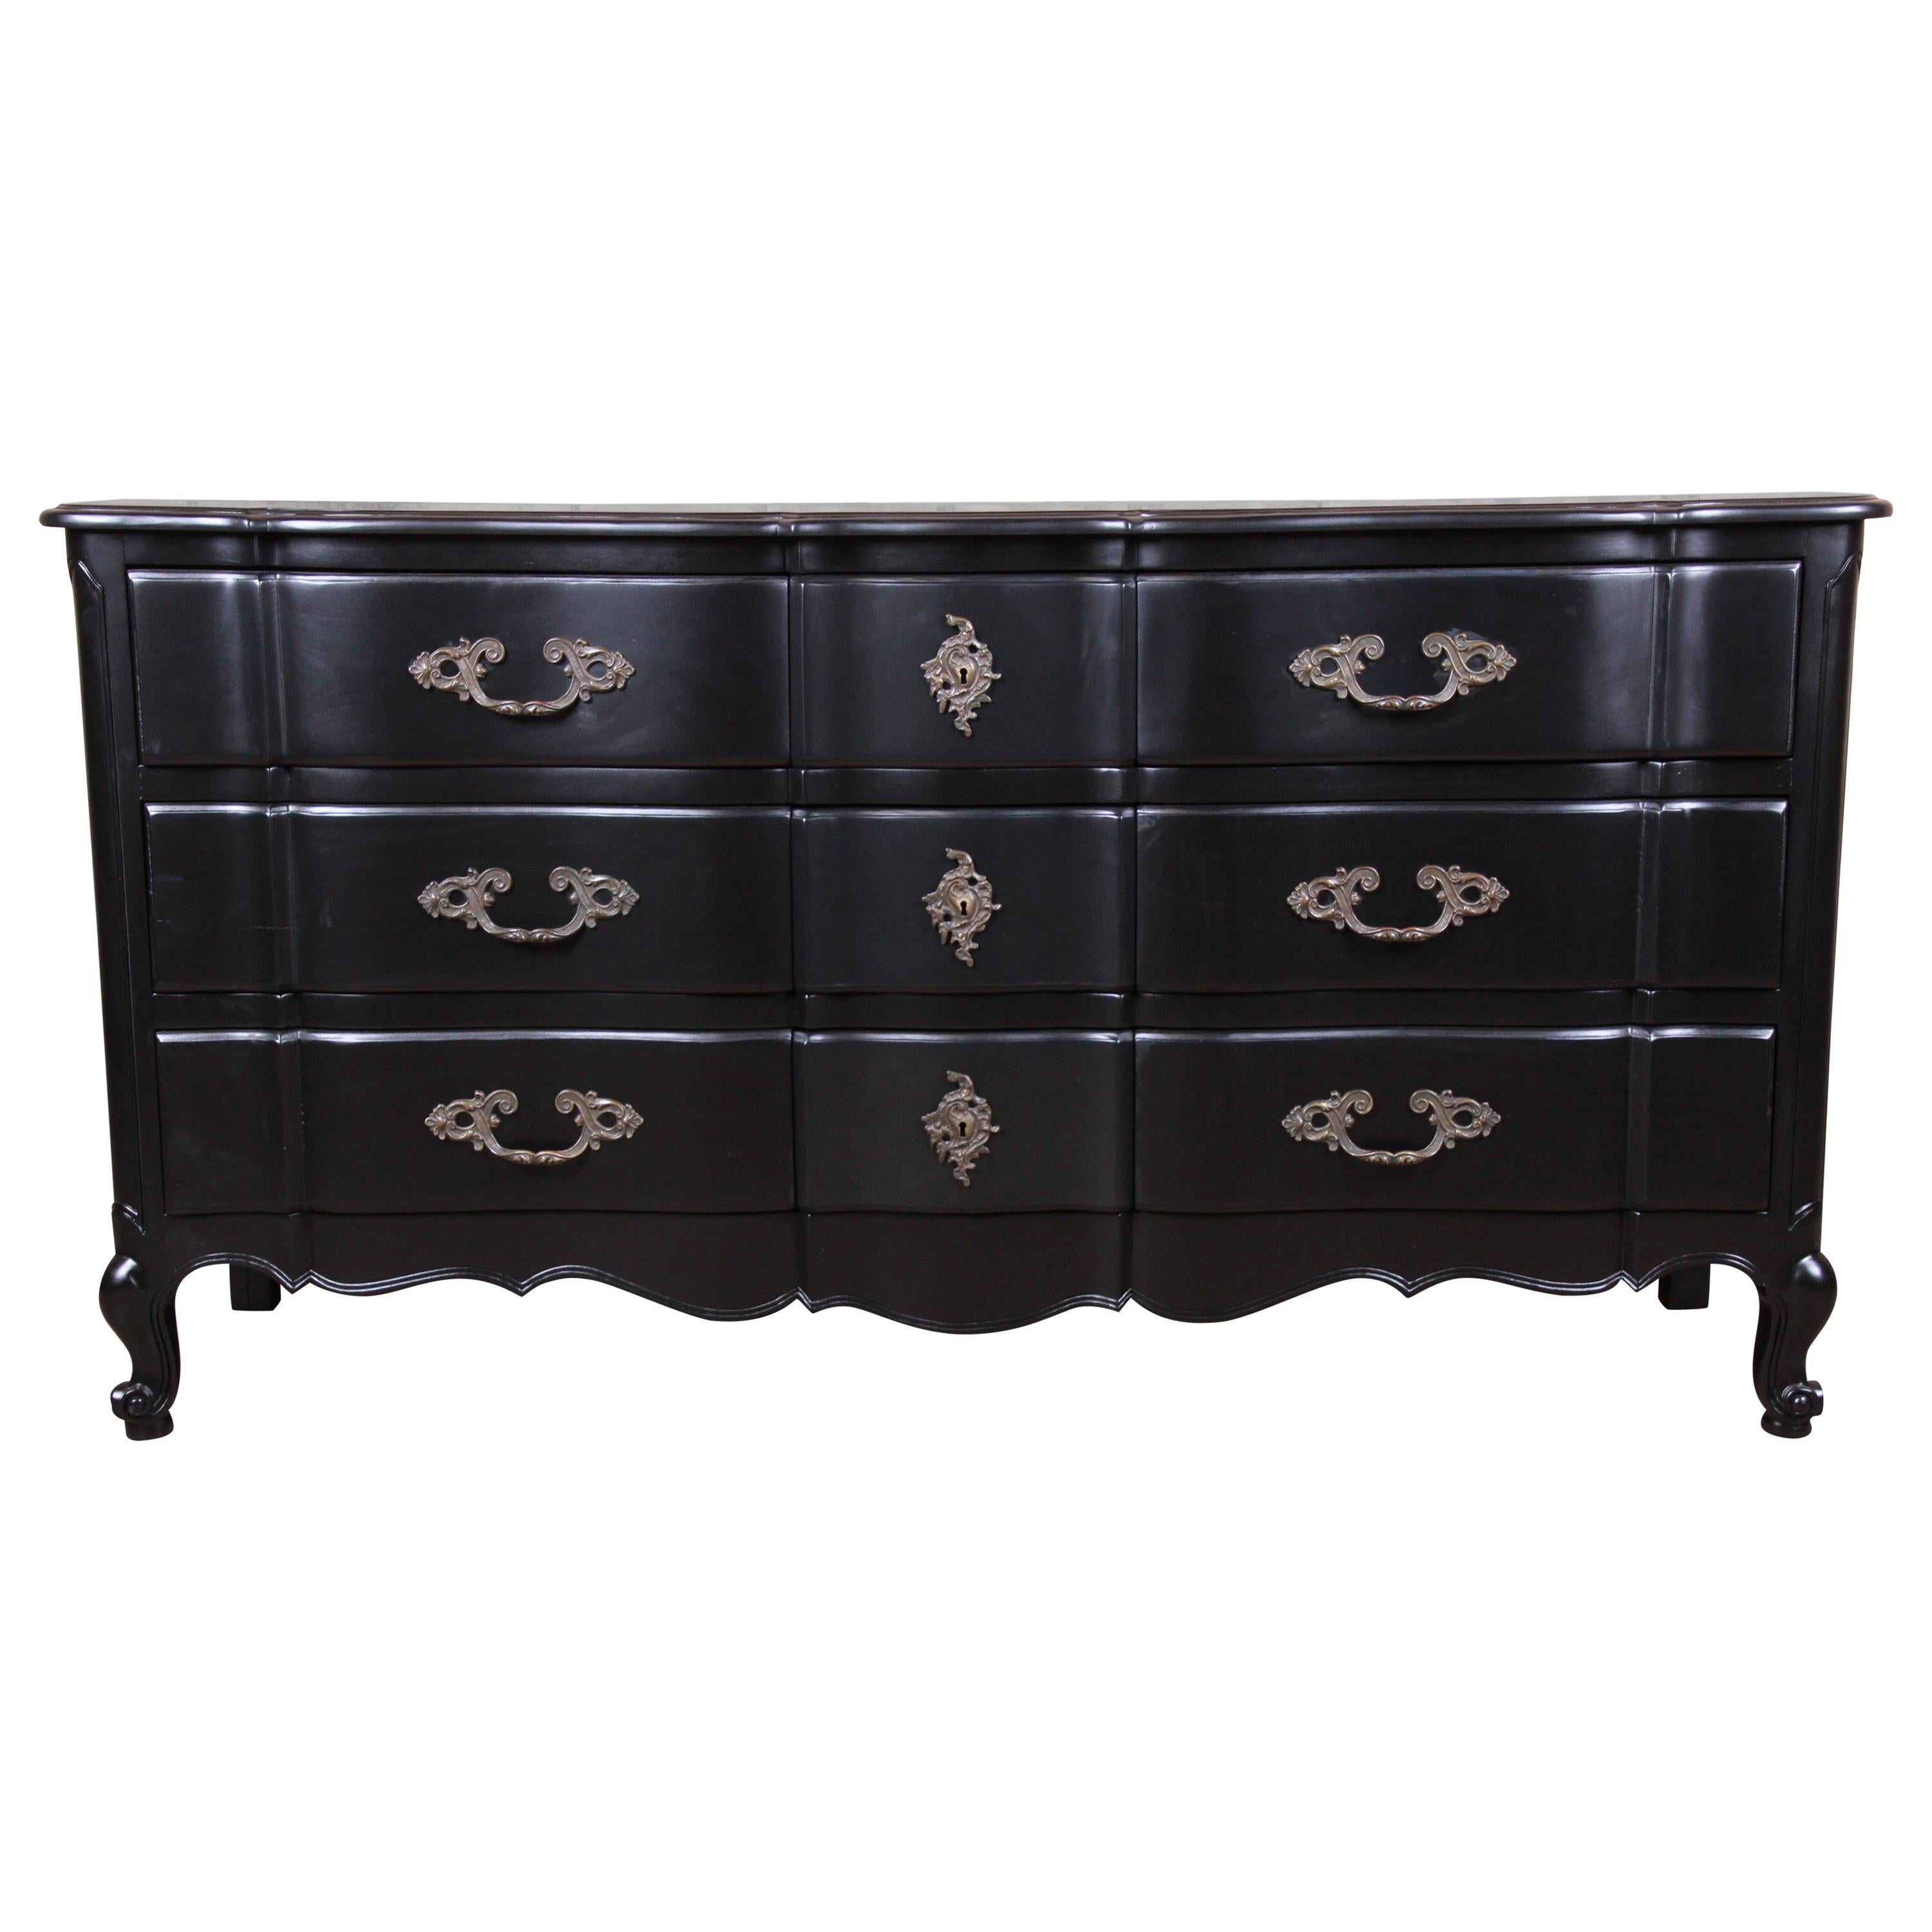 John Stuart French Provincial Louis XV Black Lacquered Dresser, Newly Refinished